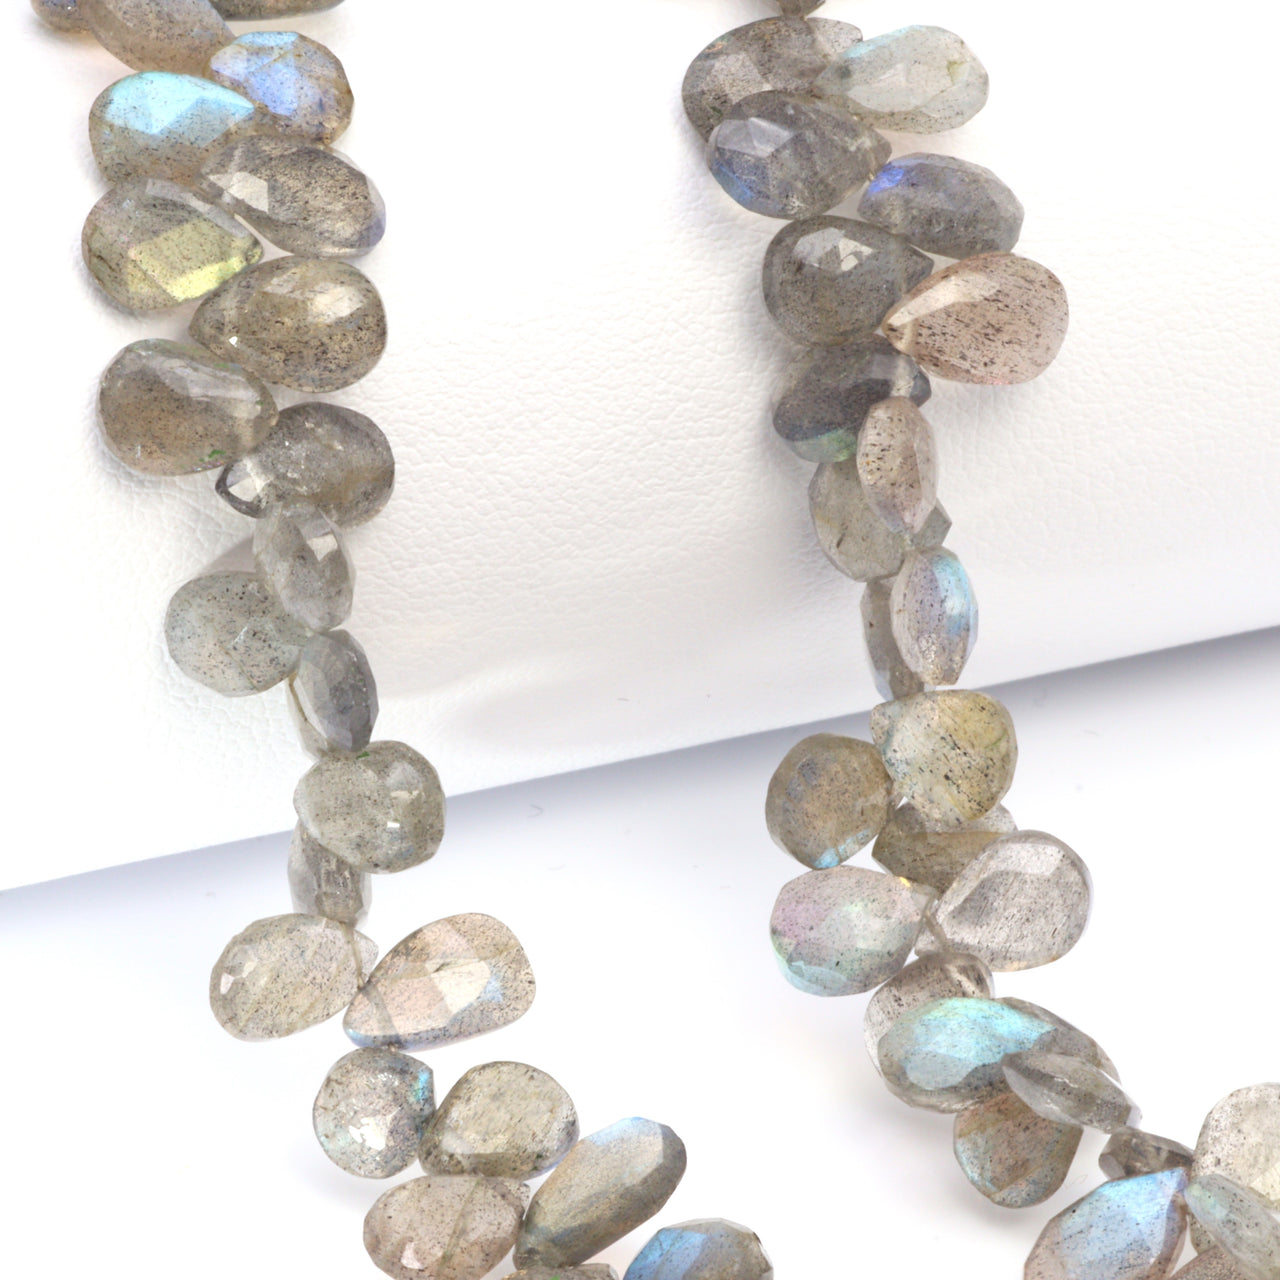 Blue Labradorite 7x5mm Faceted Pear Shaped Briolettes